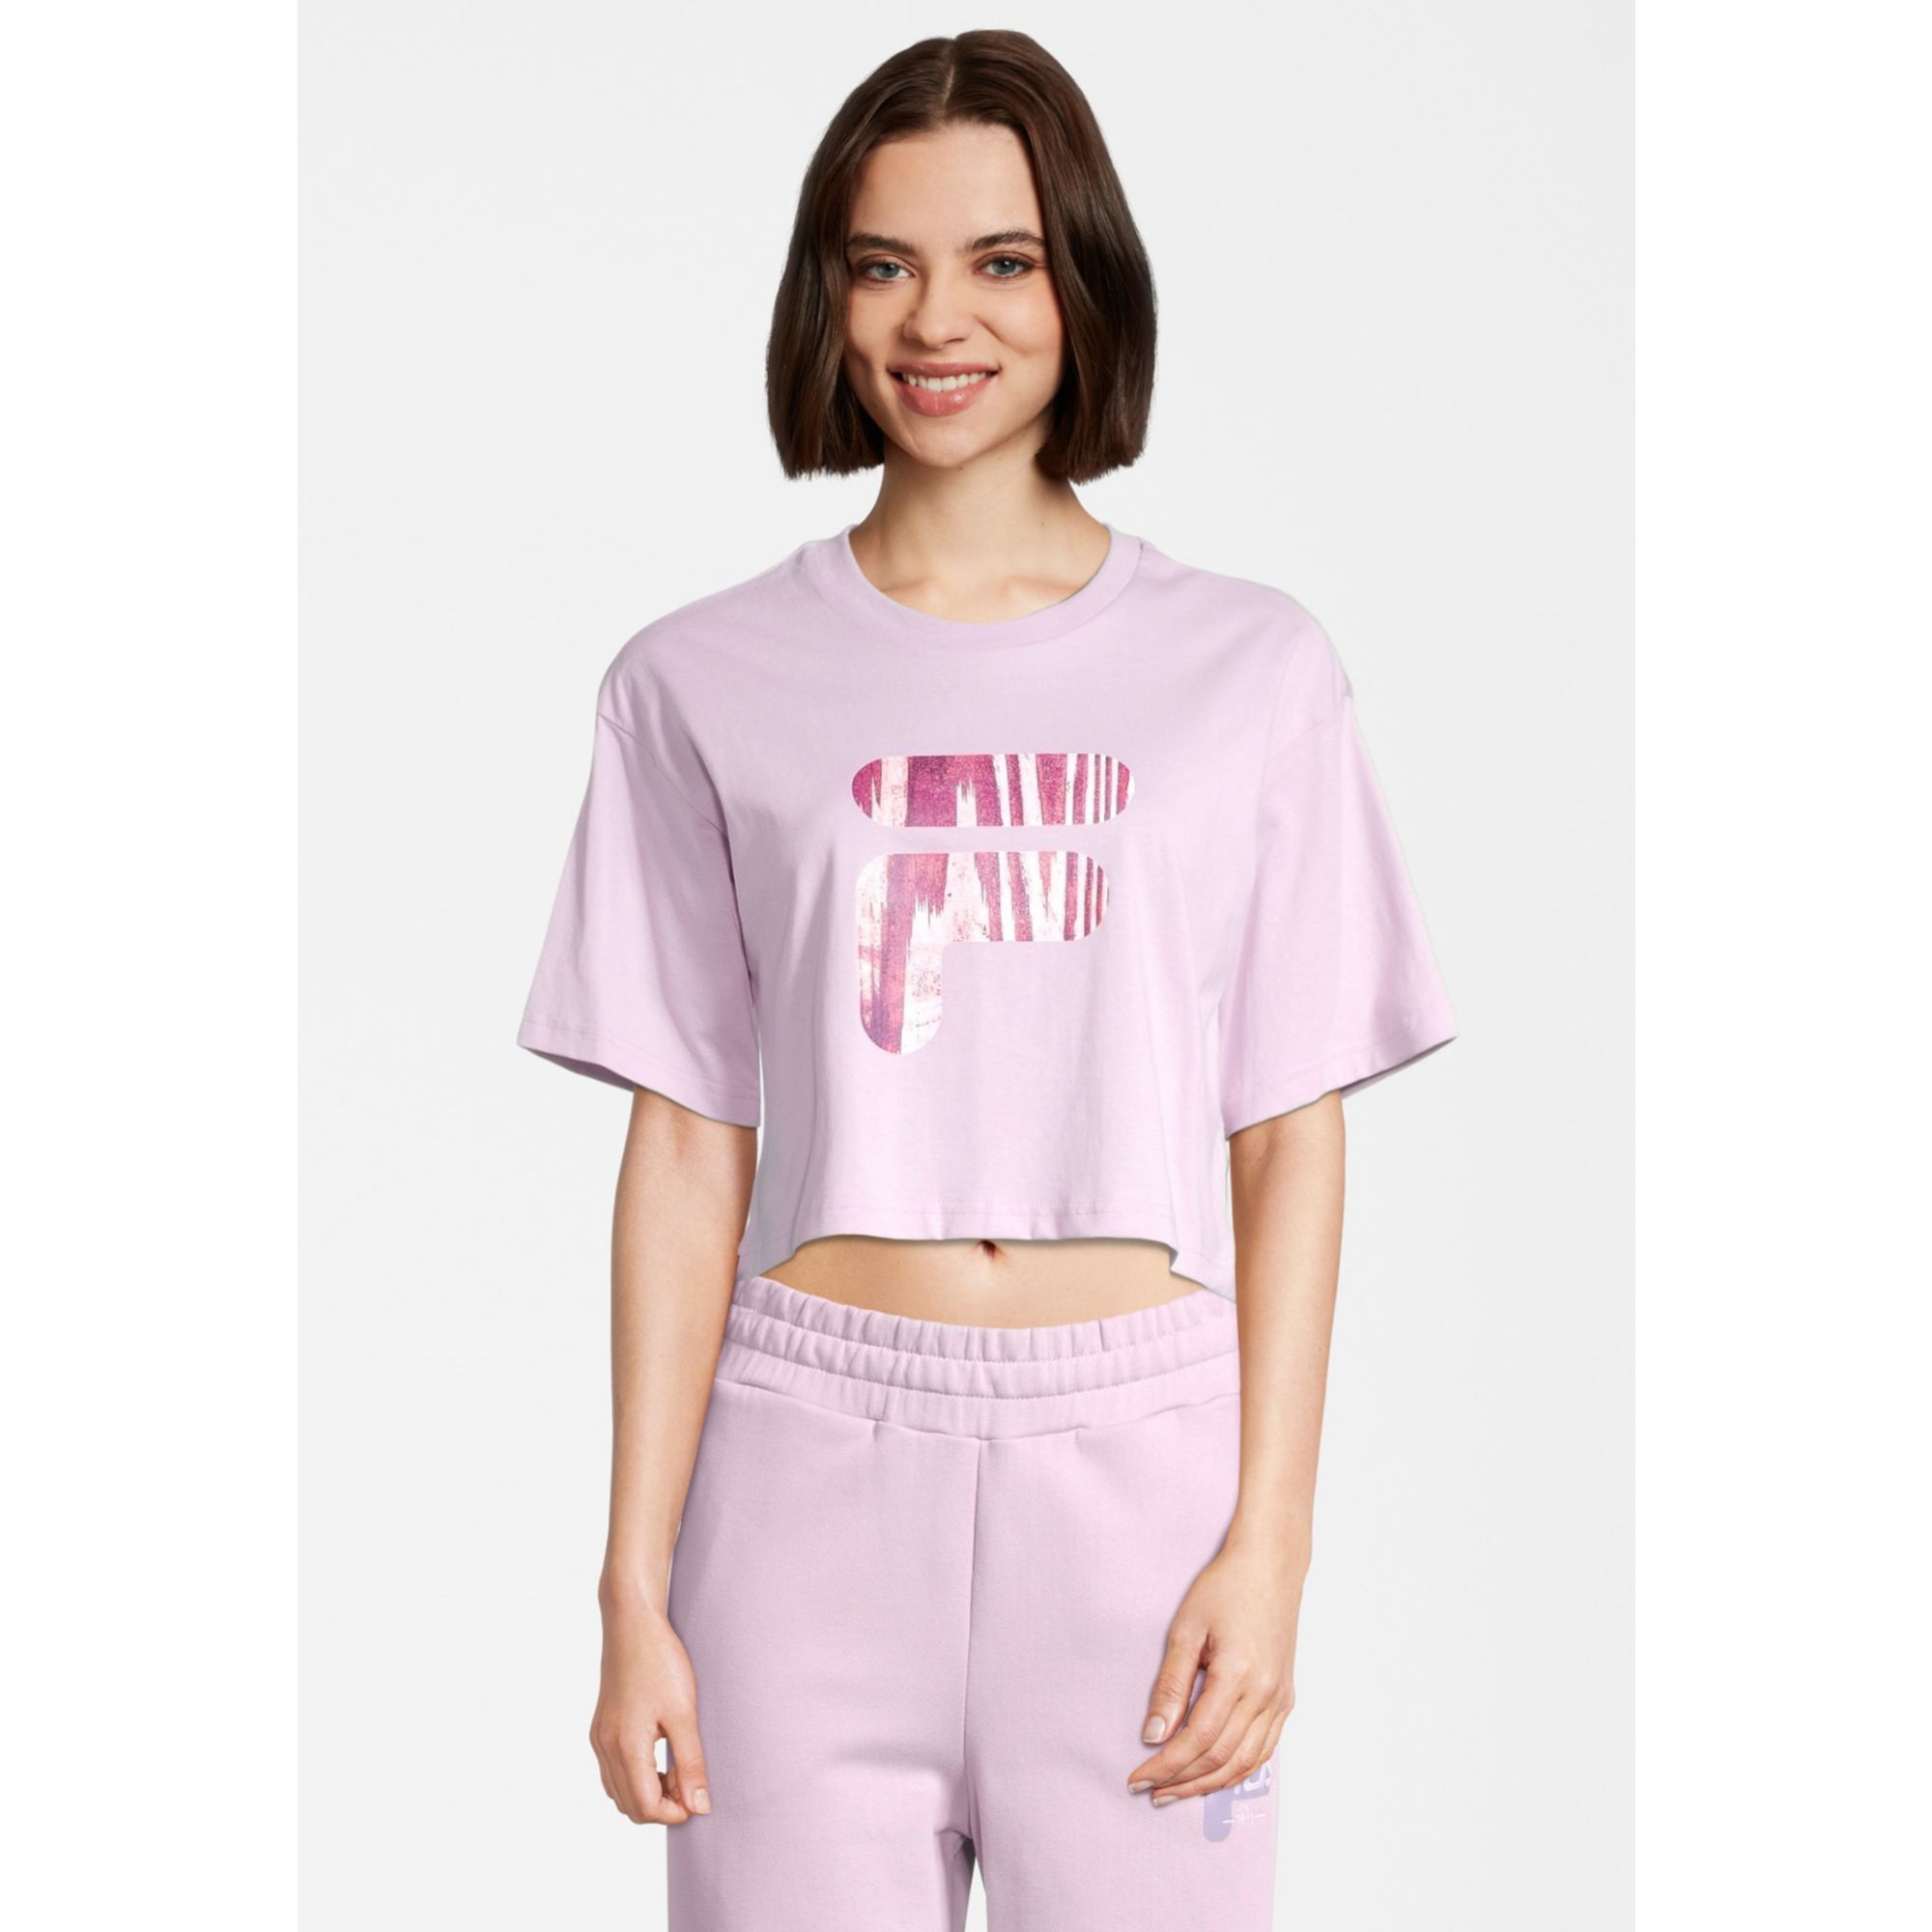 BOTHEL cropped graphic tee